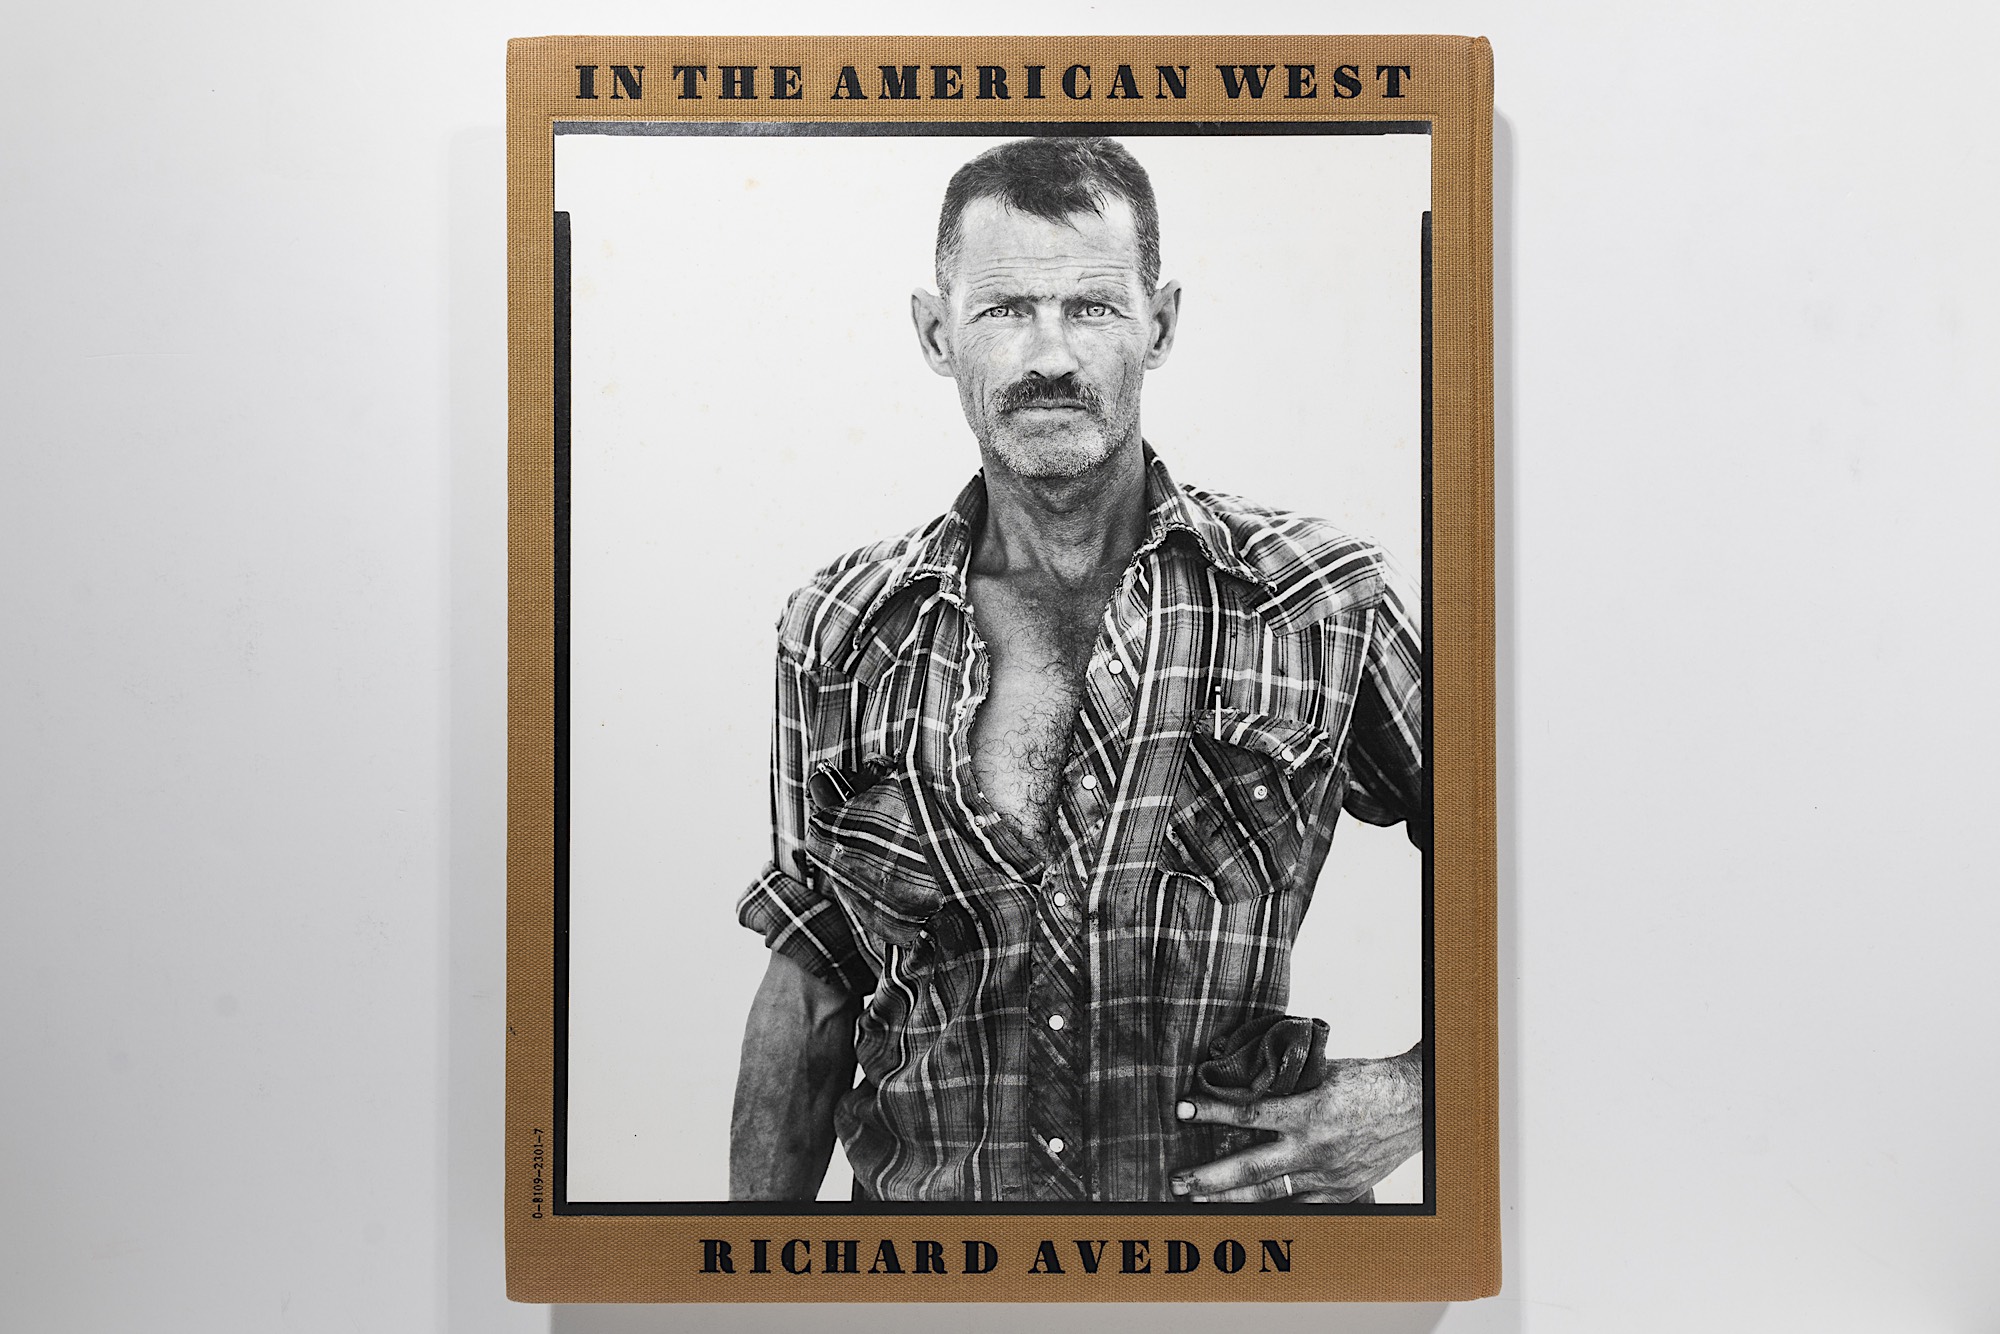 Richard Avedon - In the American West Image 4